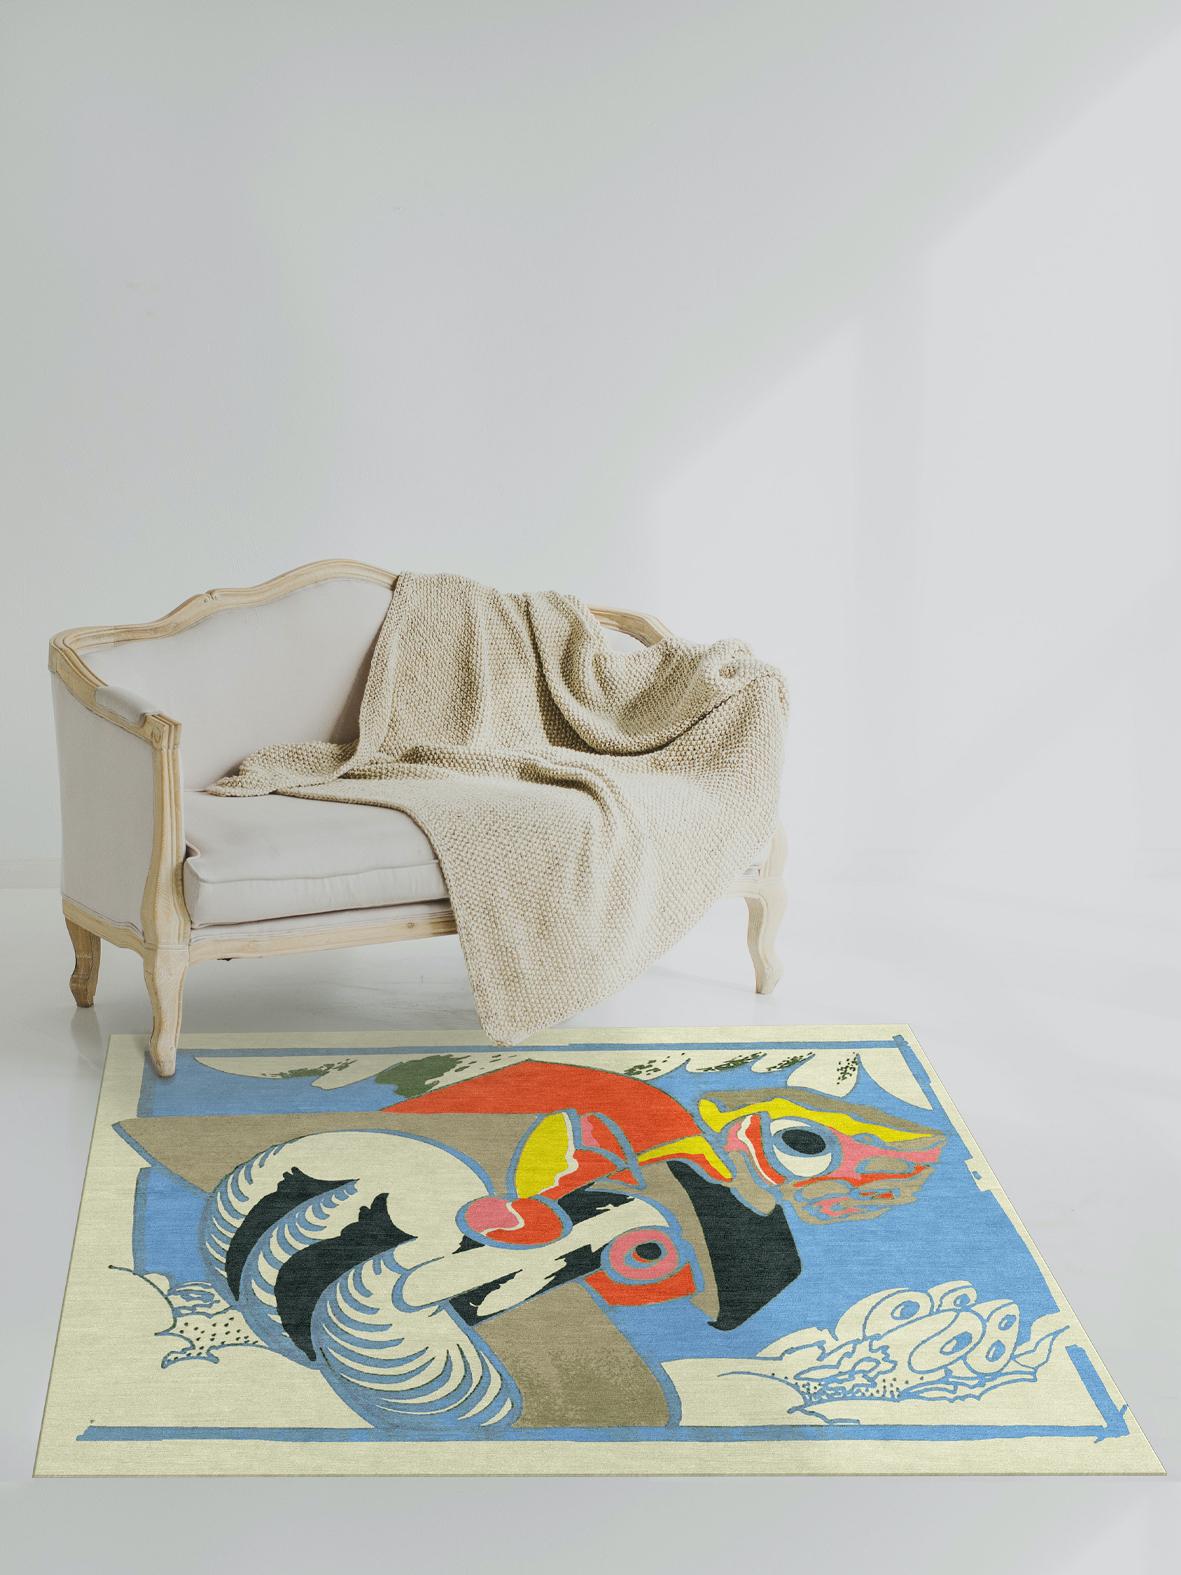 Adapted from the original artwork by Luis Fernando Benedit, Segundo corte transversal, 1968. 

LALANA RUGS is an applied arts initiative born from the desire to combine proposals by contemporary artists with traditional local techniques and noble